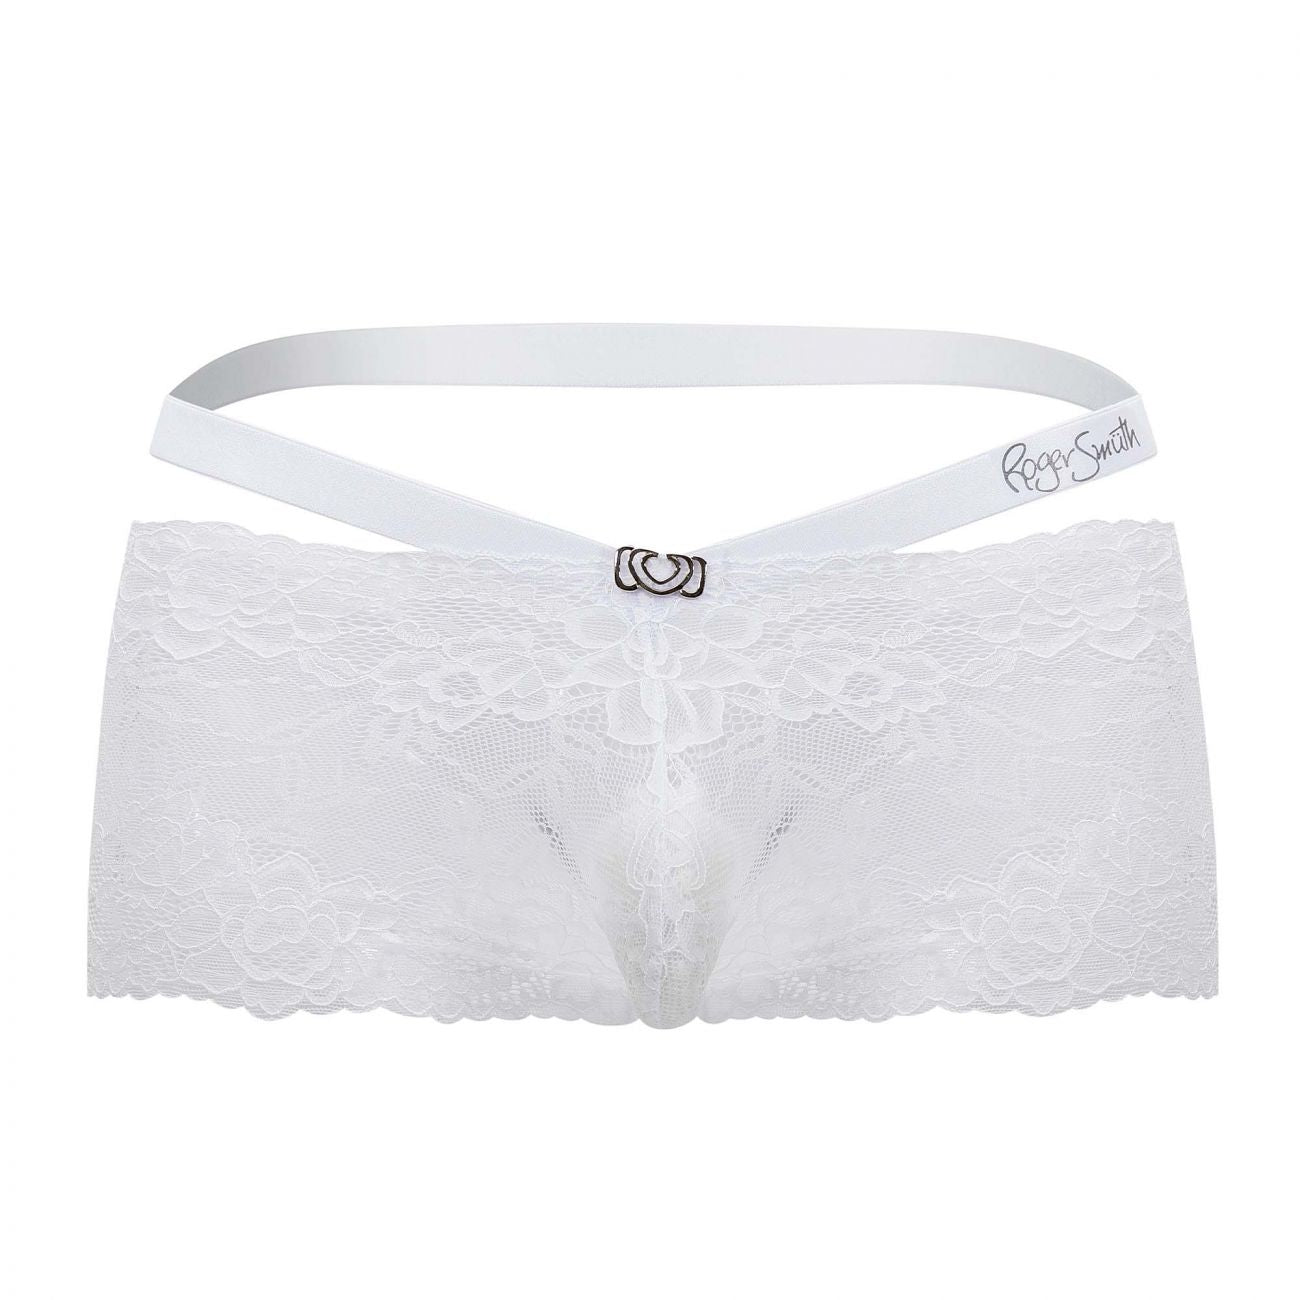 Roger Smuth RS047 Trunks White